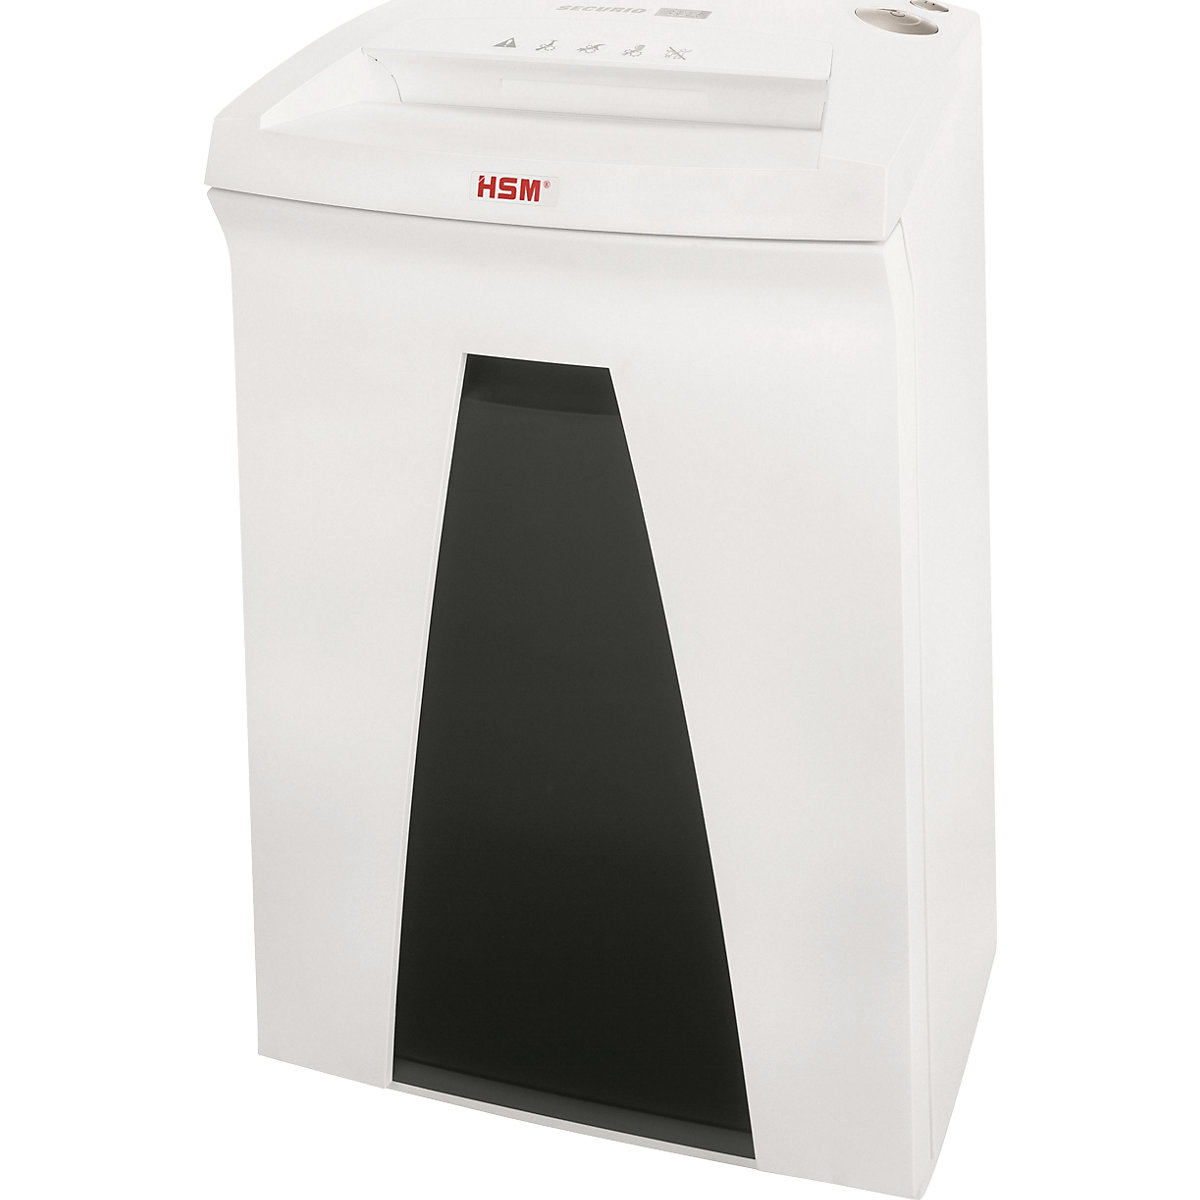 HSM – SECURIO document shredder B24, collection capacity 34 l, strips, 19 – 21 sheets